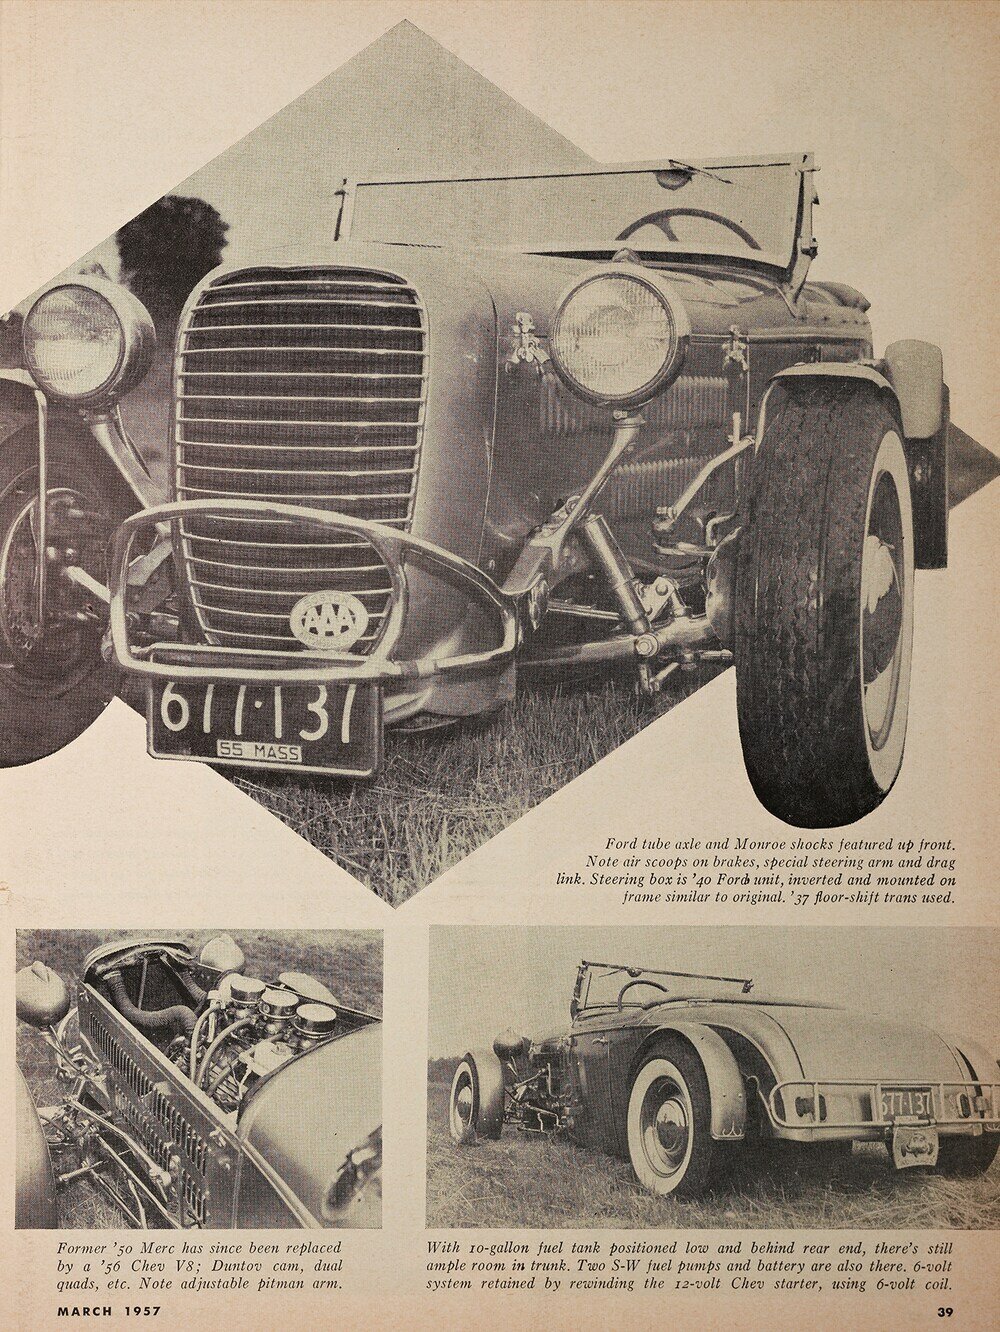 003-fitzgerald-1932-ford-roadster-hrm-layout-right-page.jpg